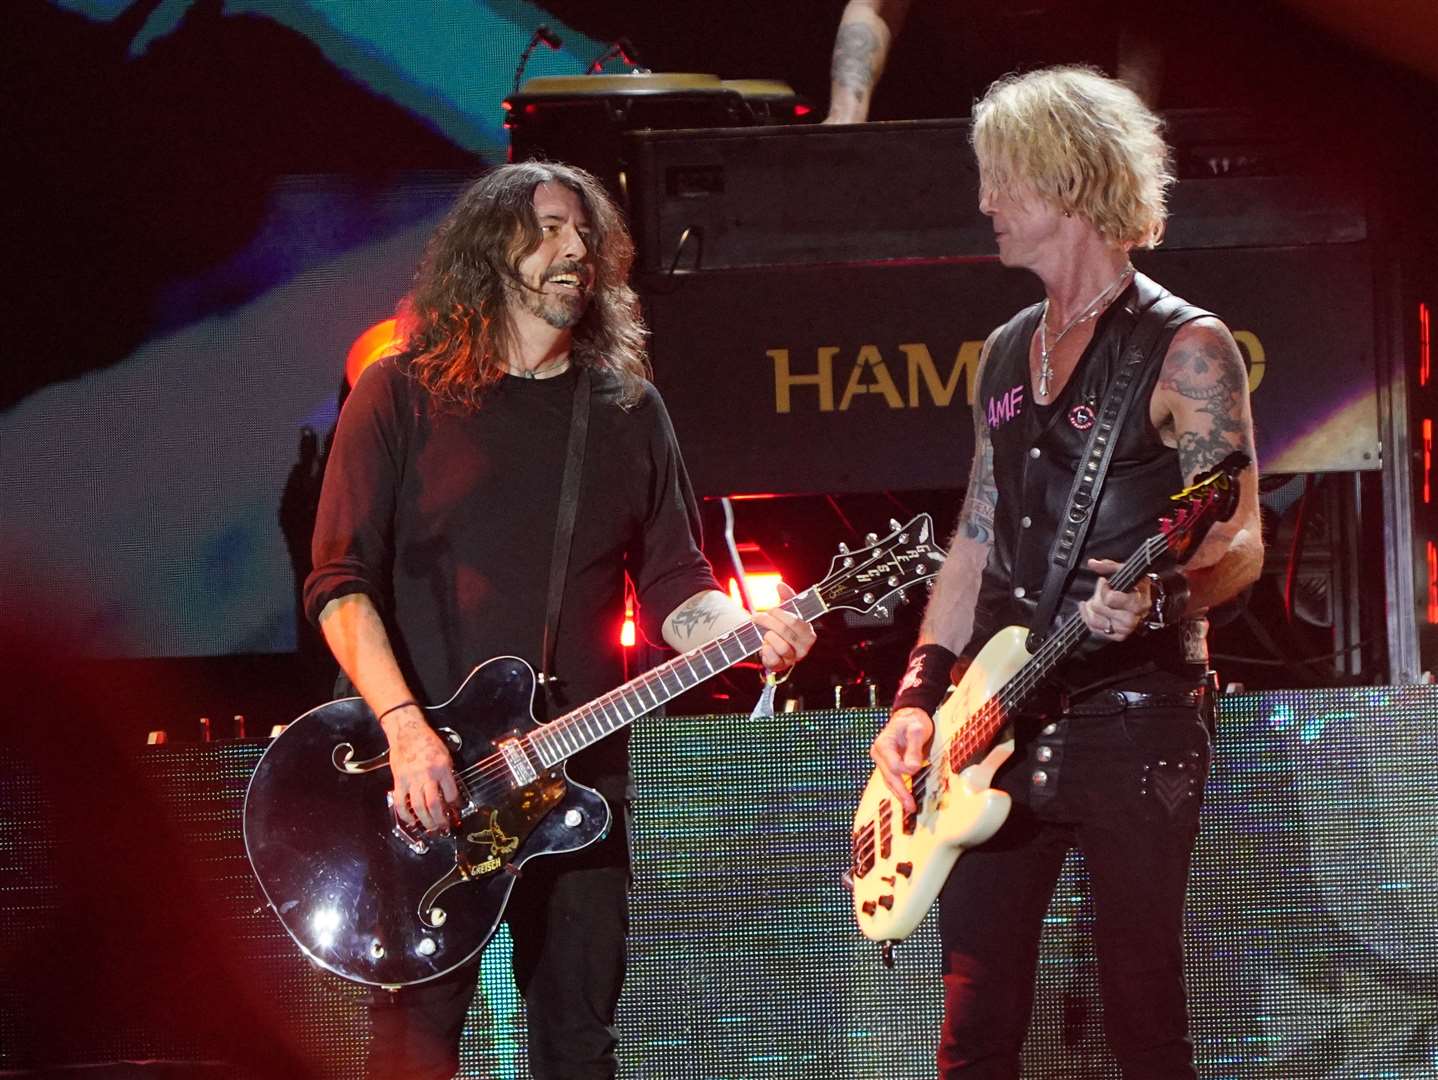 Dave Grohl joins Guns N’ Roses on stage performing on the Pyramid Stage (Yui Mok/PA)